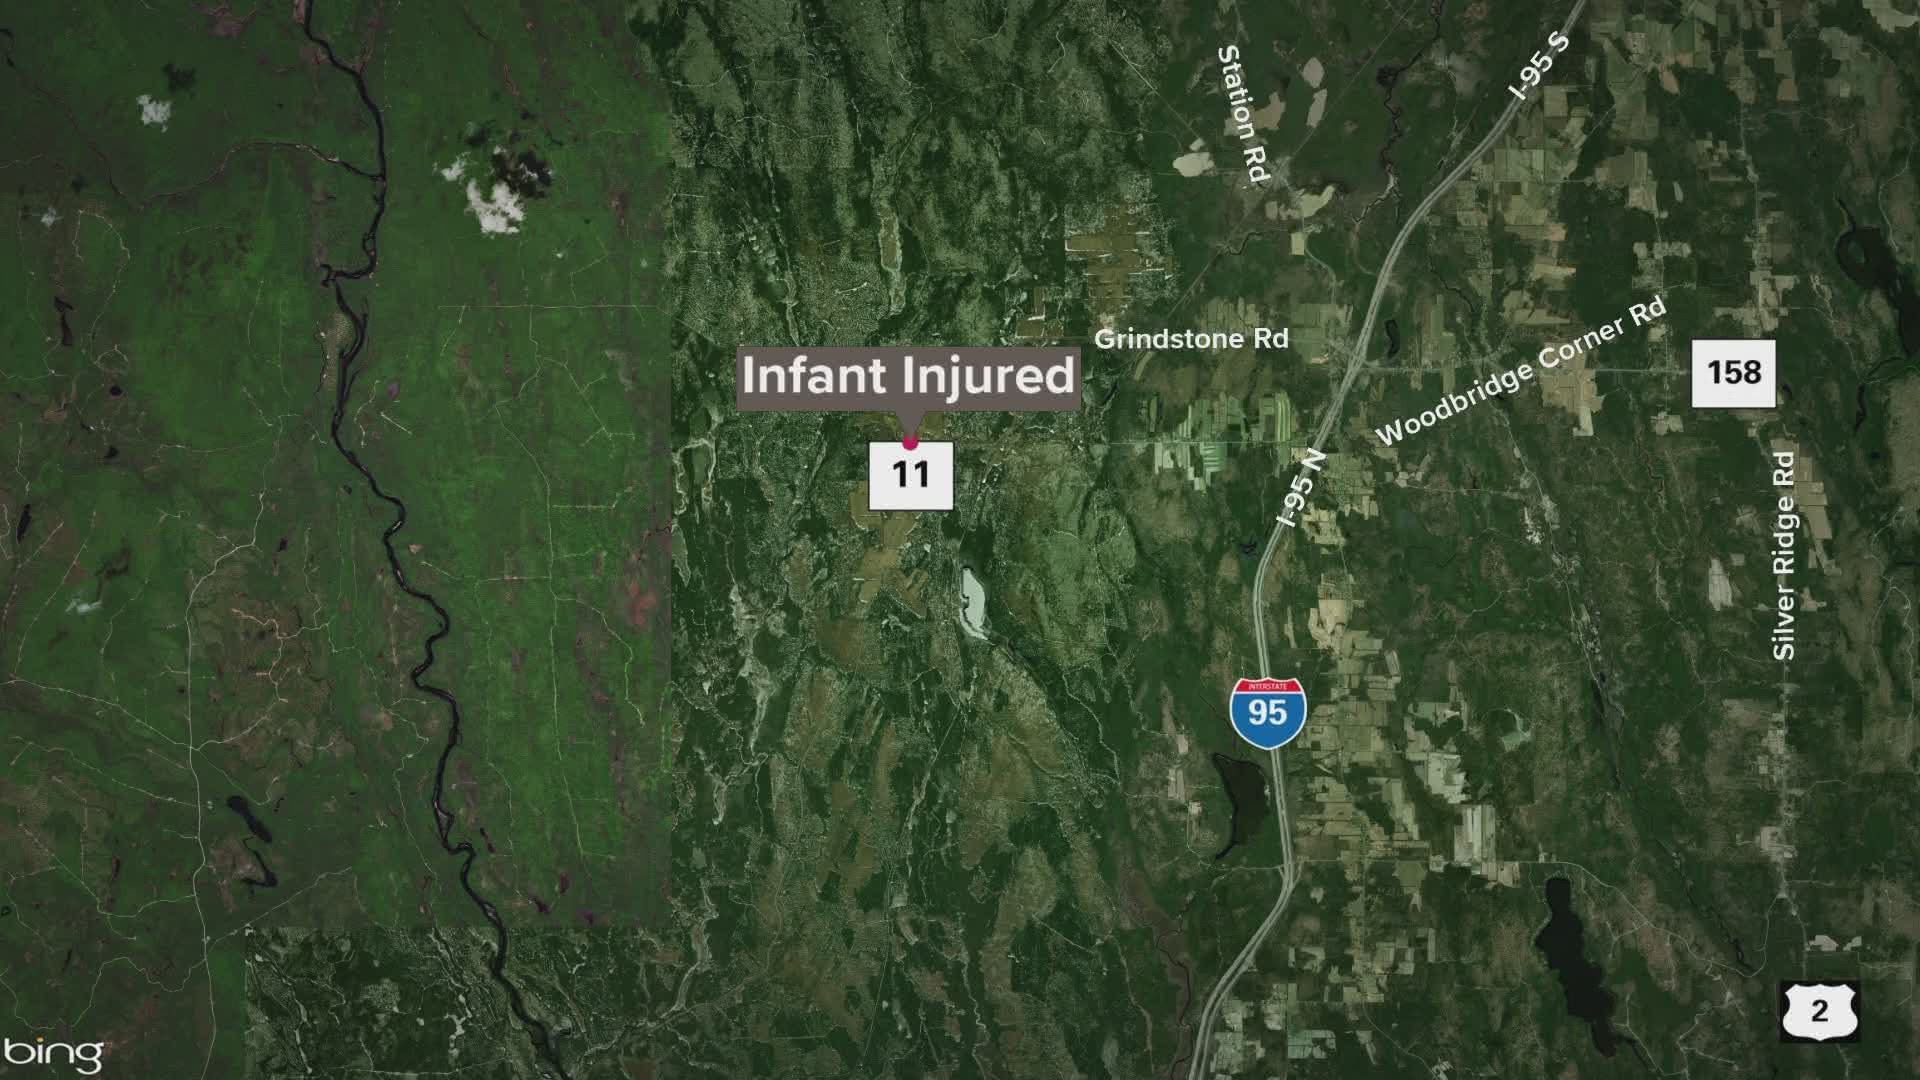 An investigation is underway after the death of a 4-month old child in Stacyville. Police say the child accidentally fell from a horse-drawn carriage.